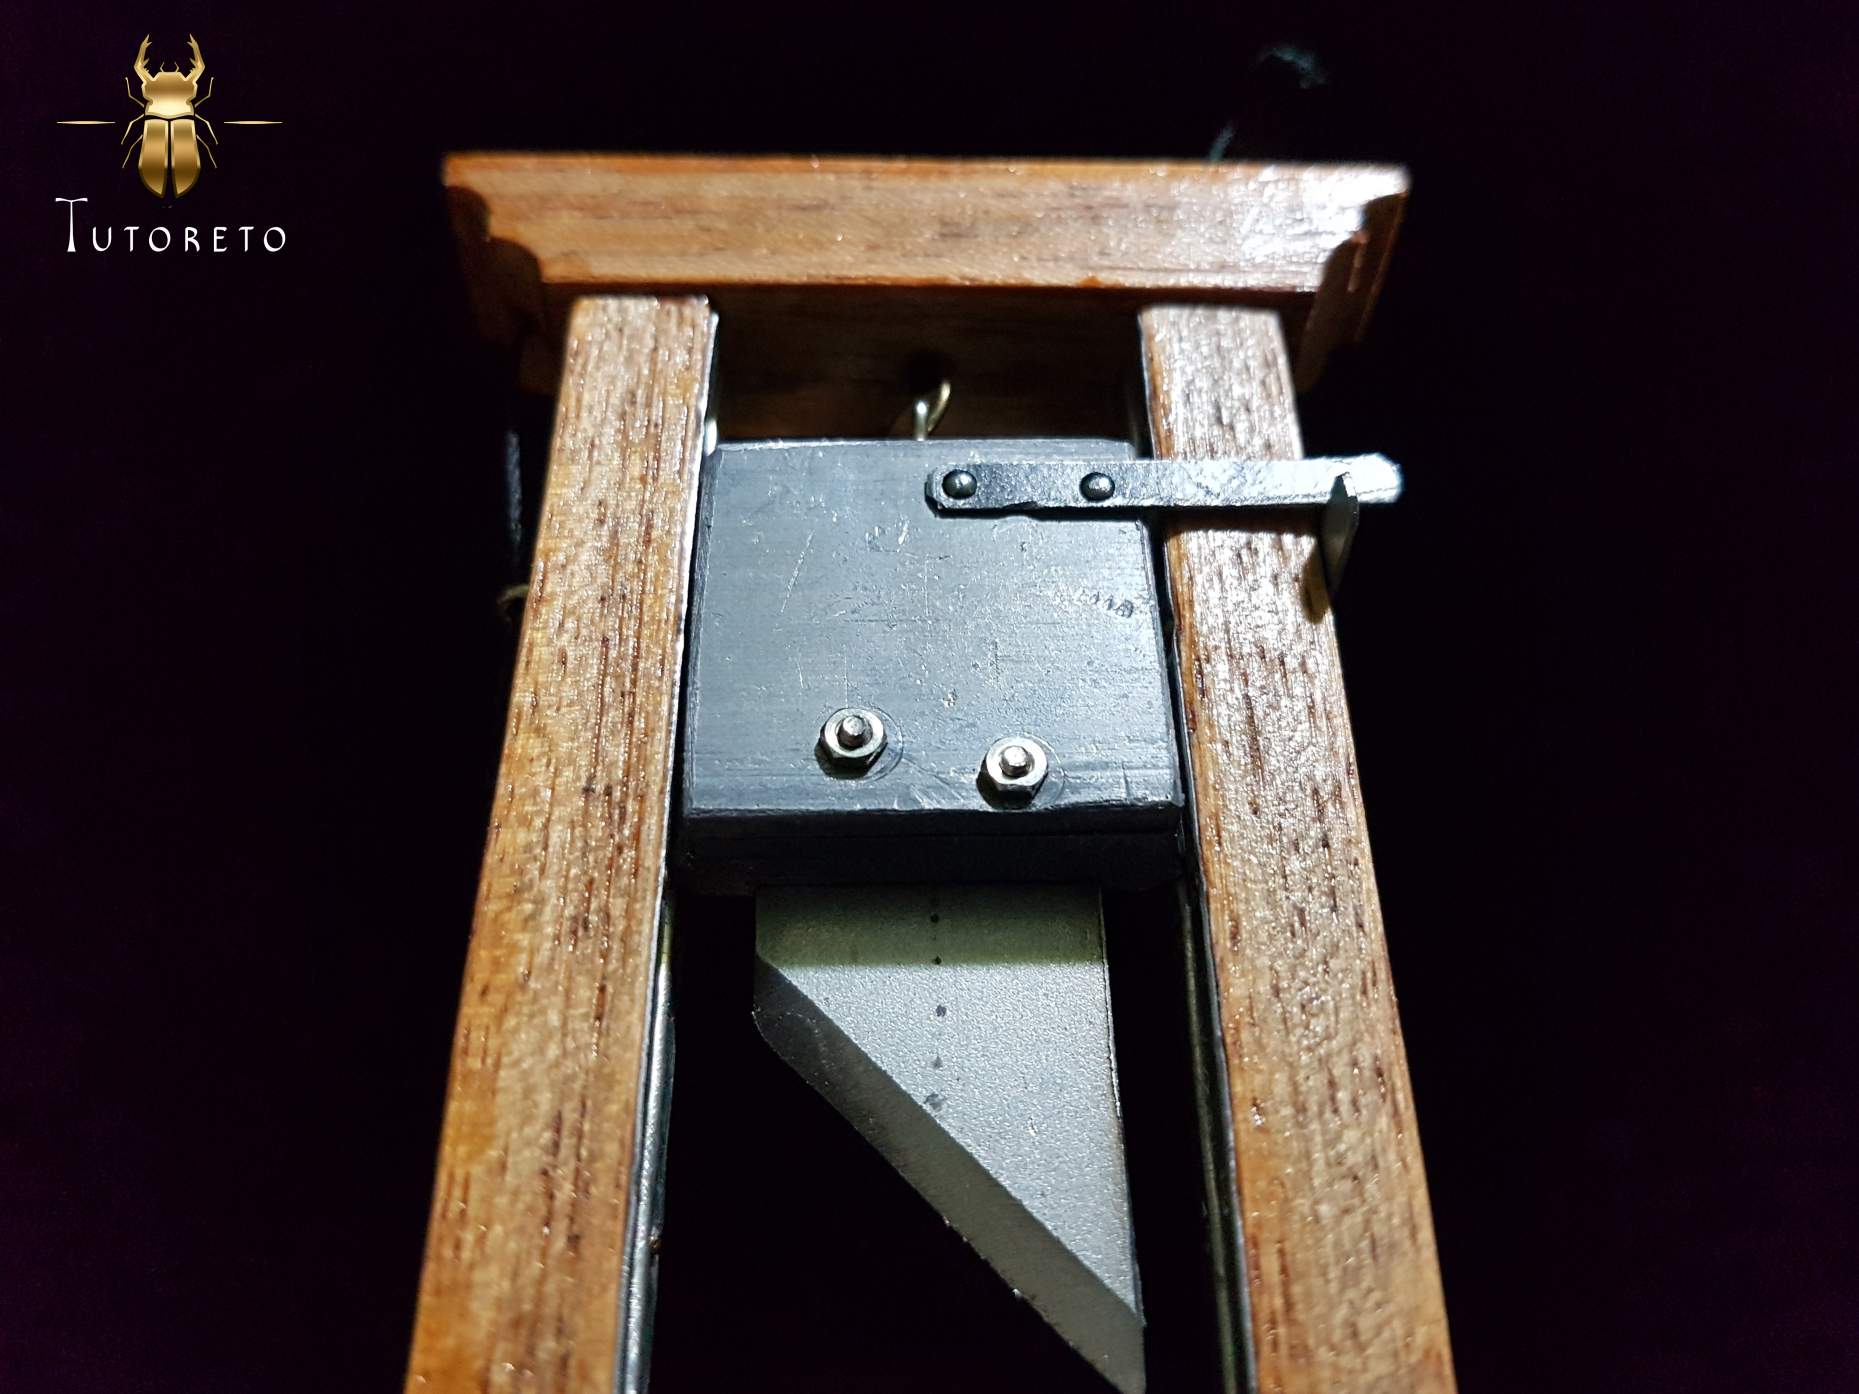 french guillotine blade